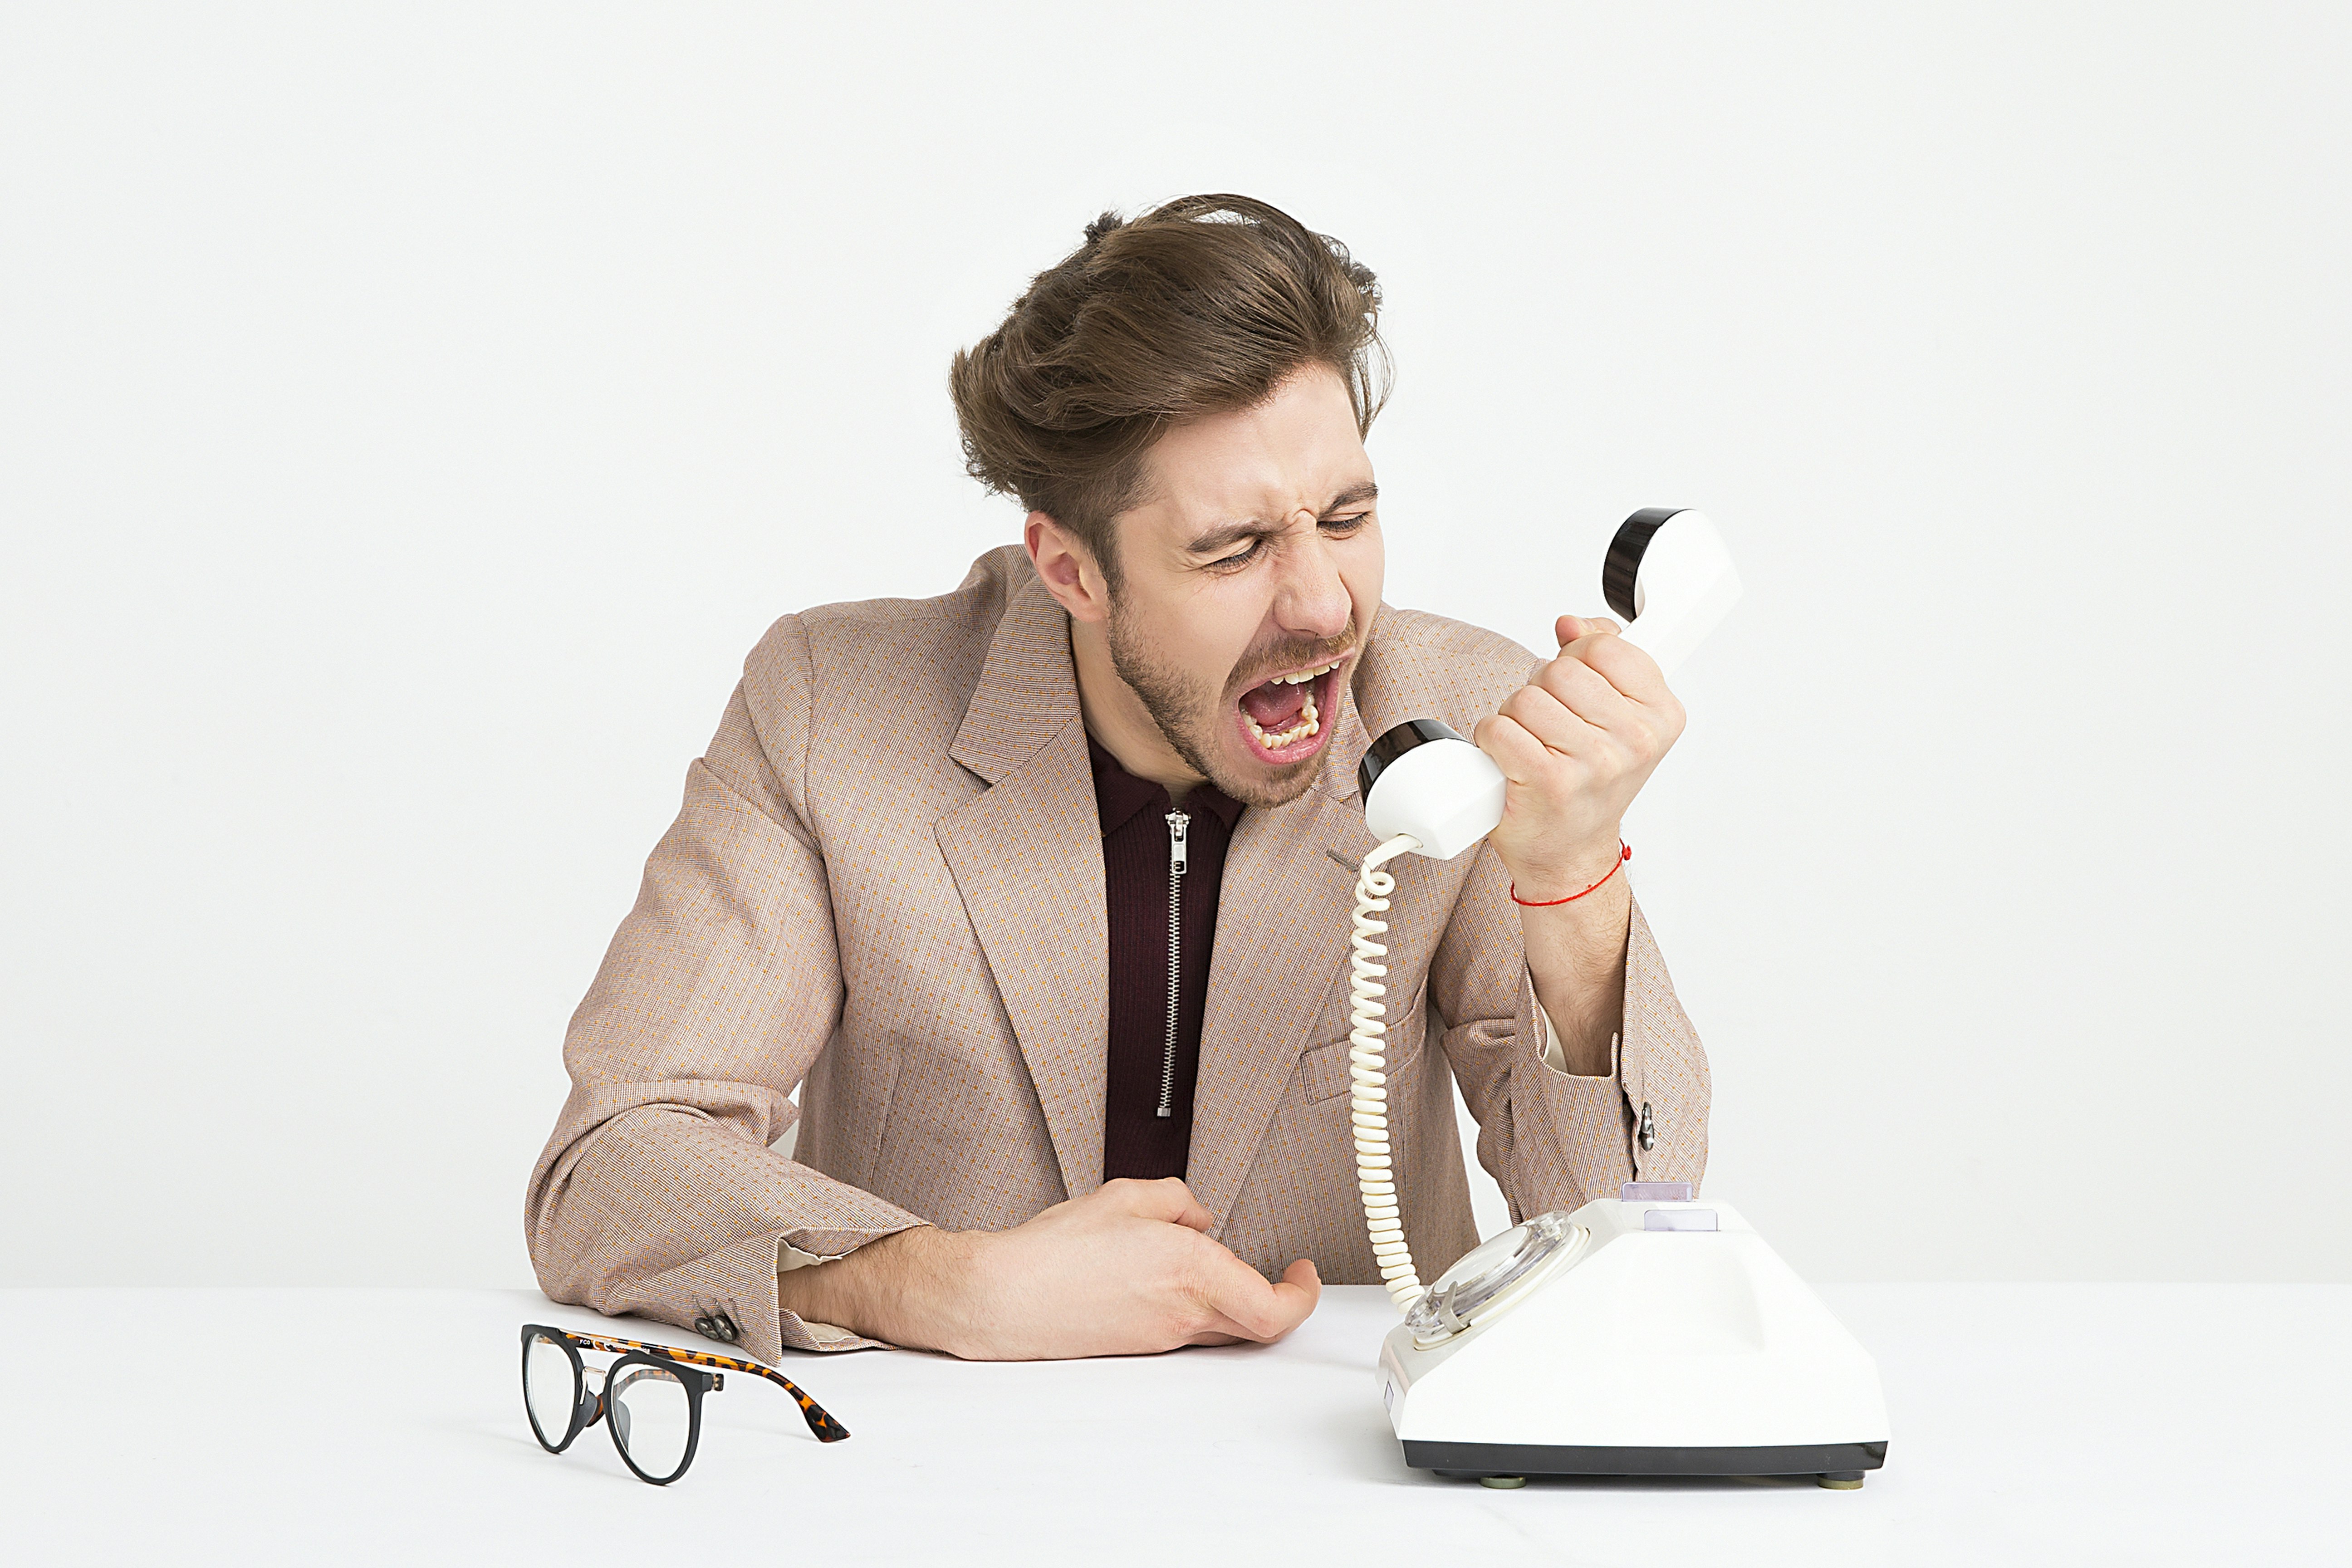 Man yelling at the phone. Cold calling, prospecting